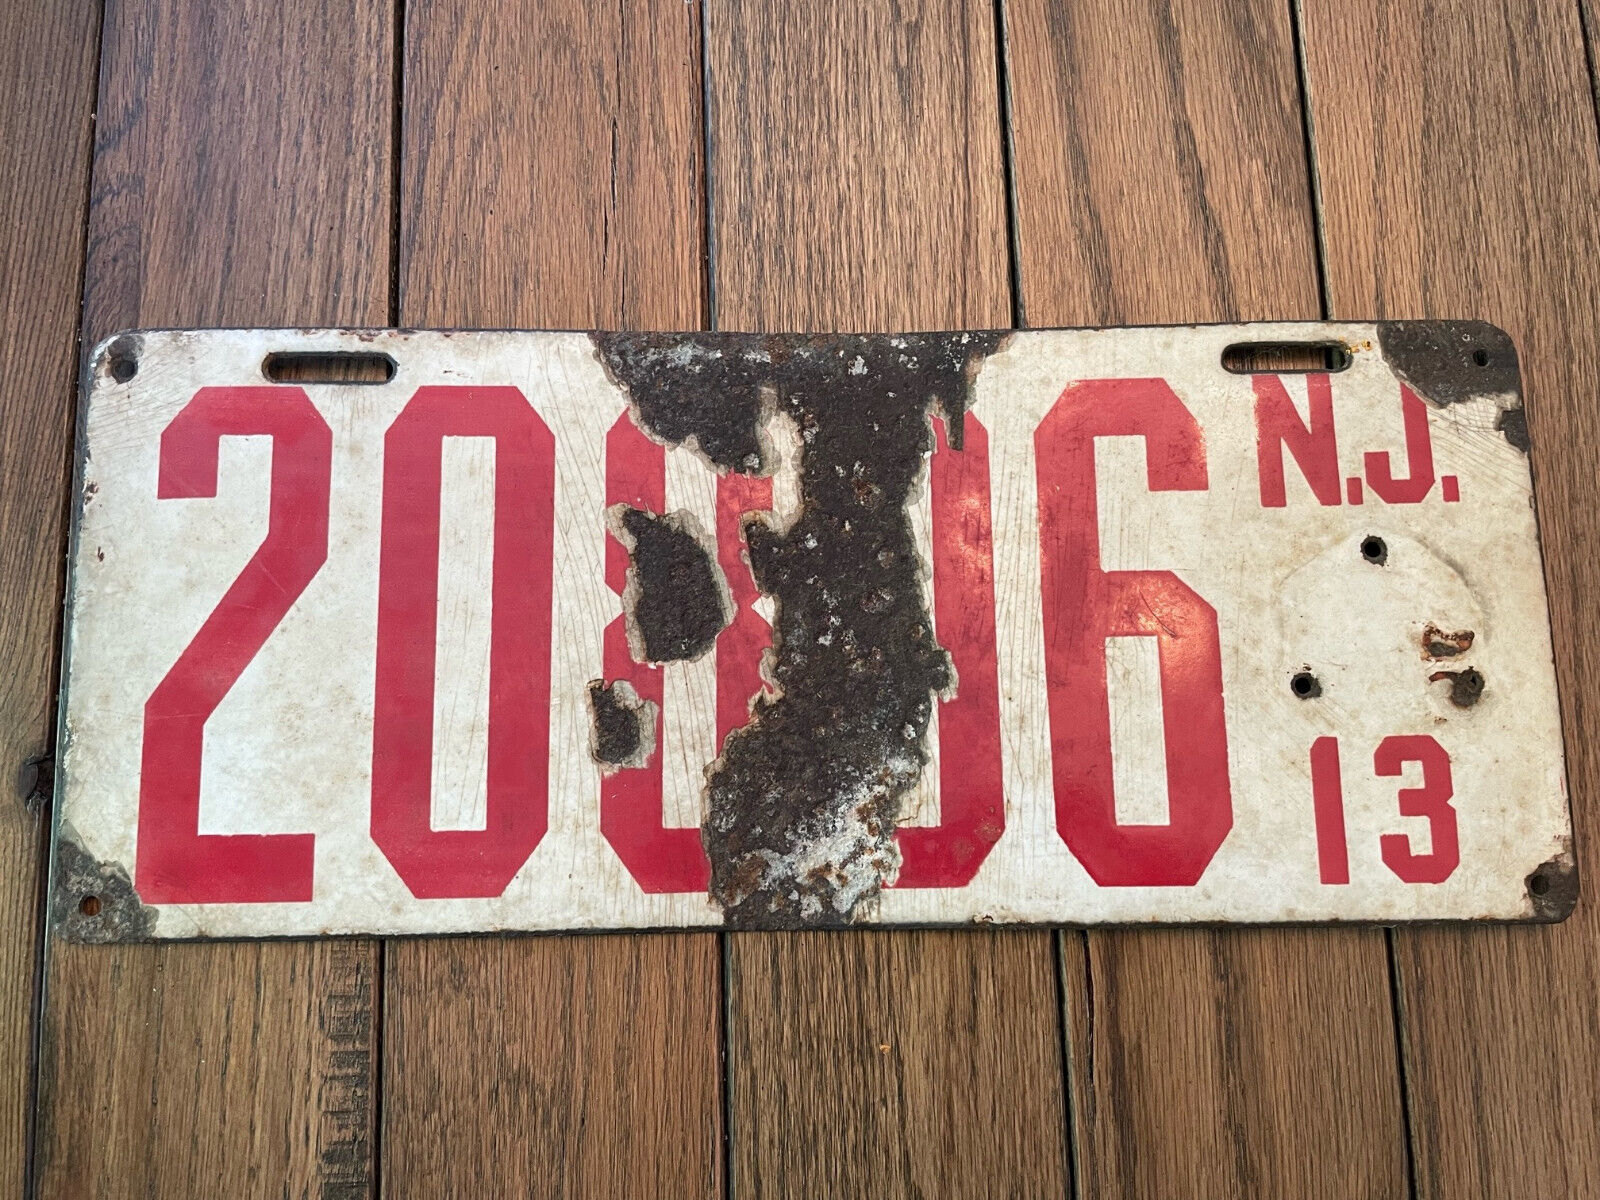 1913 White And Red Vintage Porcelain New Jersey License Plate